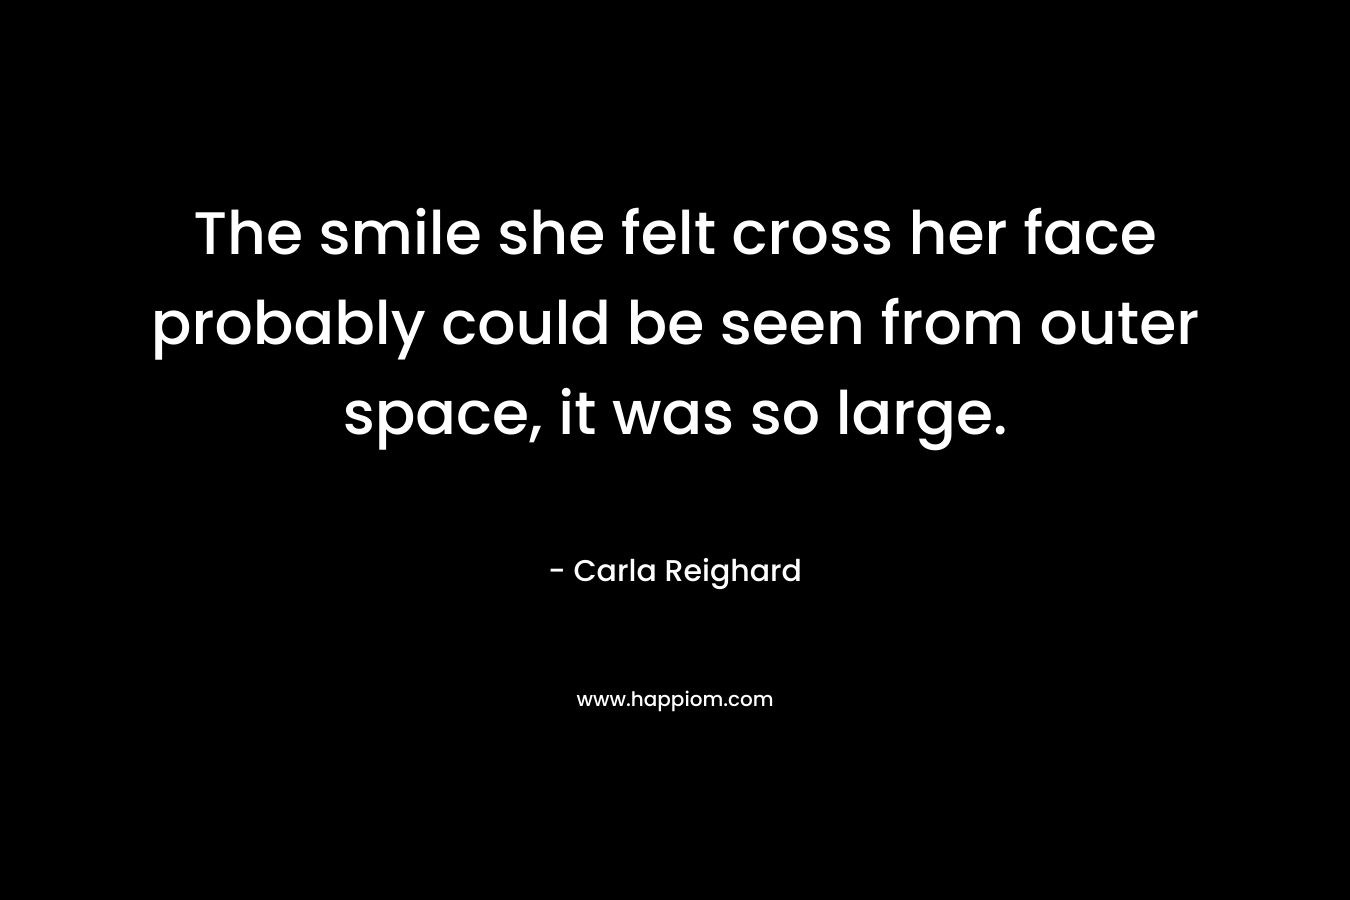 The smile she felt cross her face probably could be seen from outer space, it was so large. – Carla Reighard